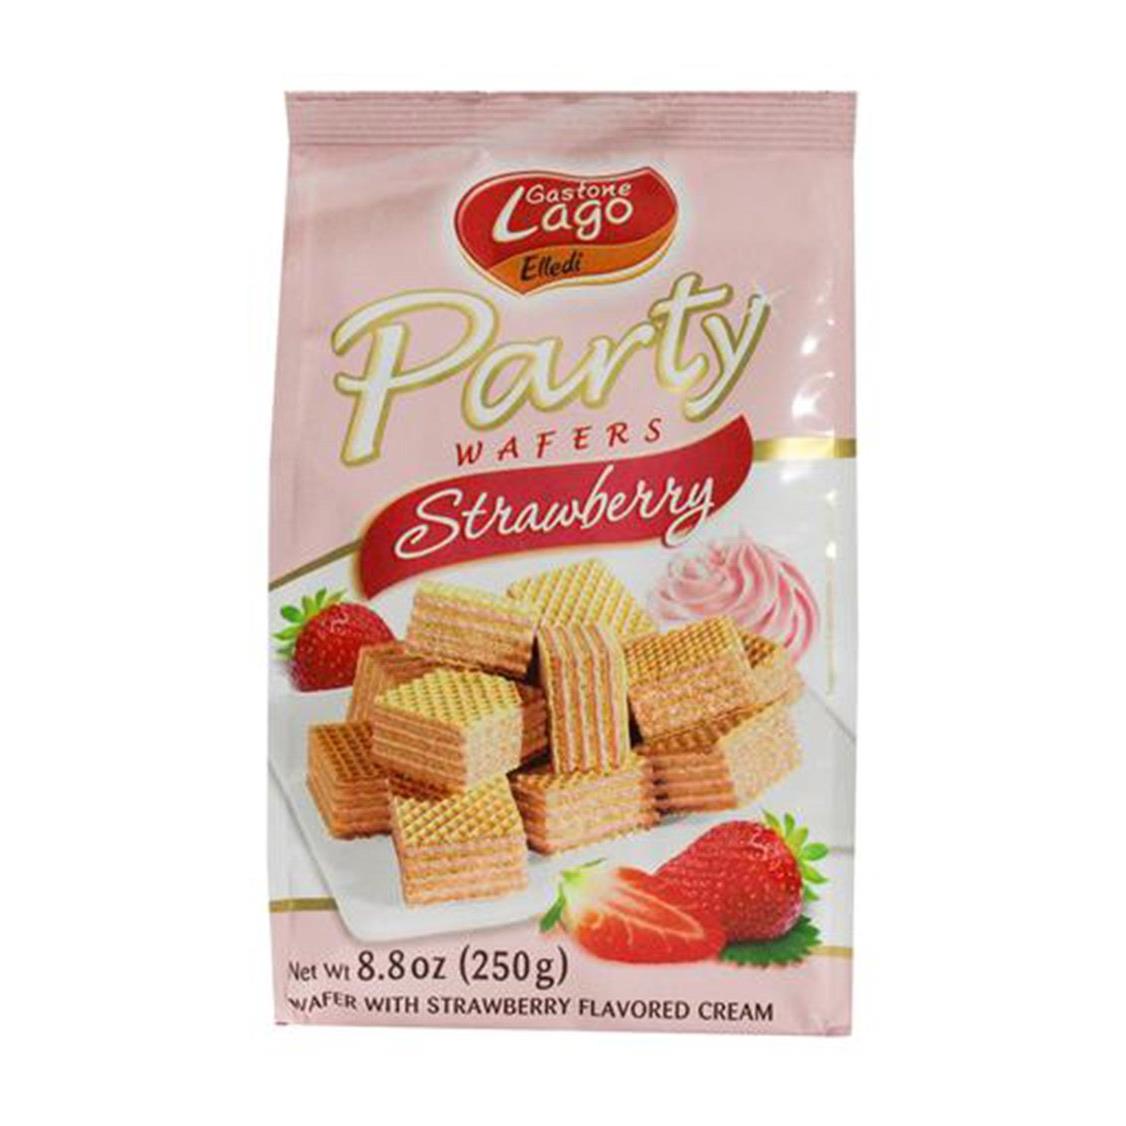 Gastone Lago Party Wafers Cookies With Strawberry Cream Filling 8.82 oz, 250g (Strawberry, 1-Pack)